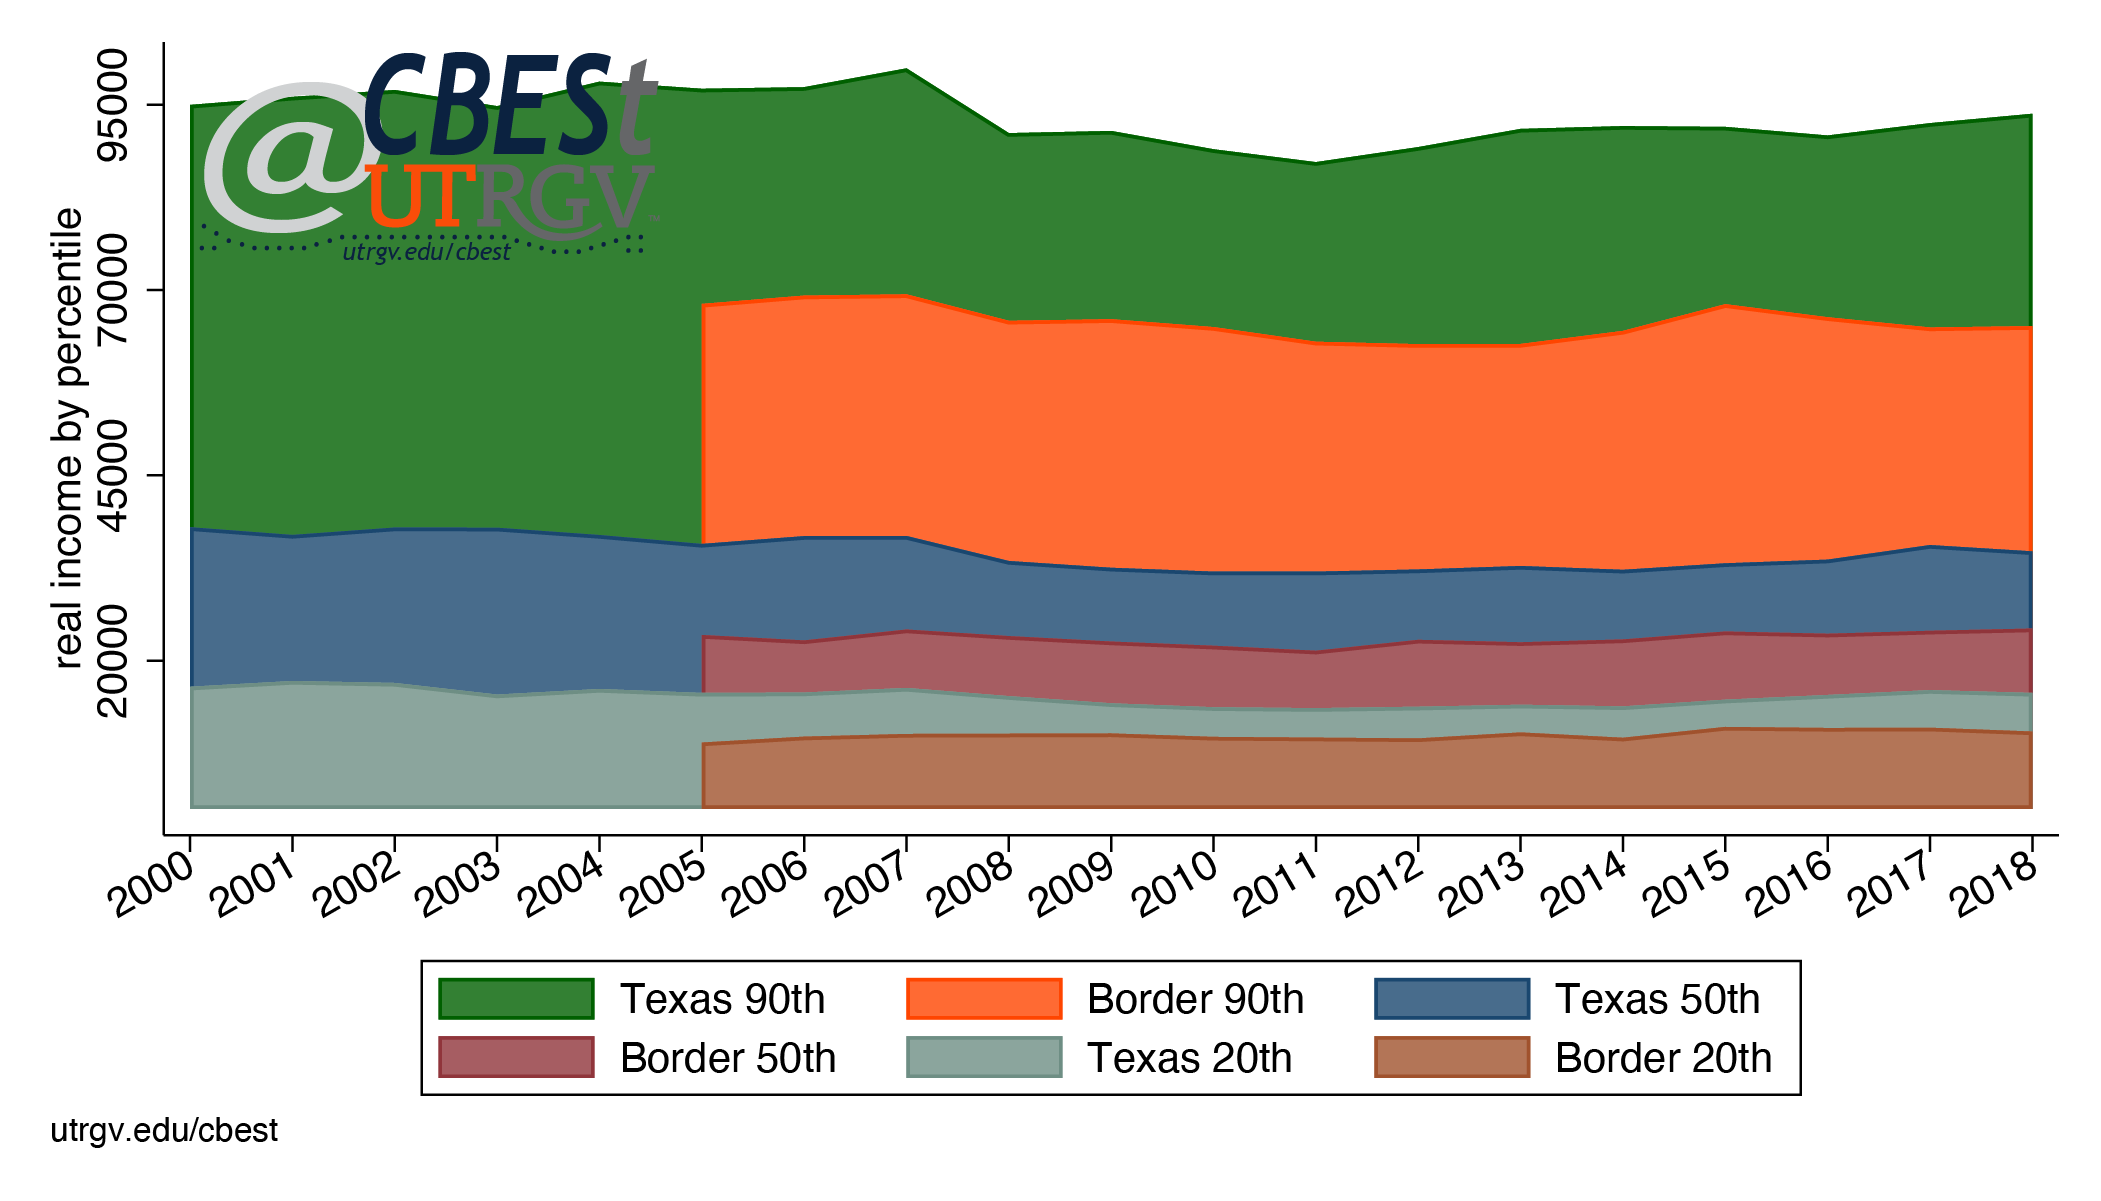 Texas and border region real incomes (2010 dollars), 2000-201